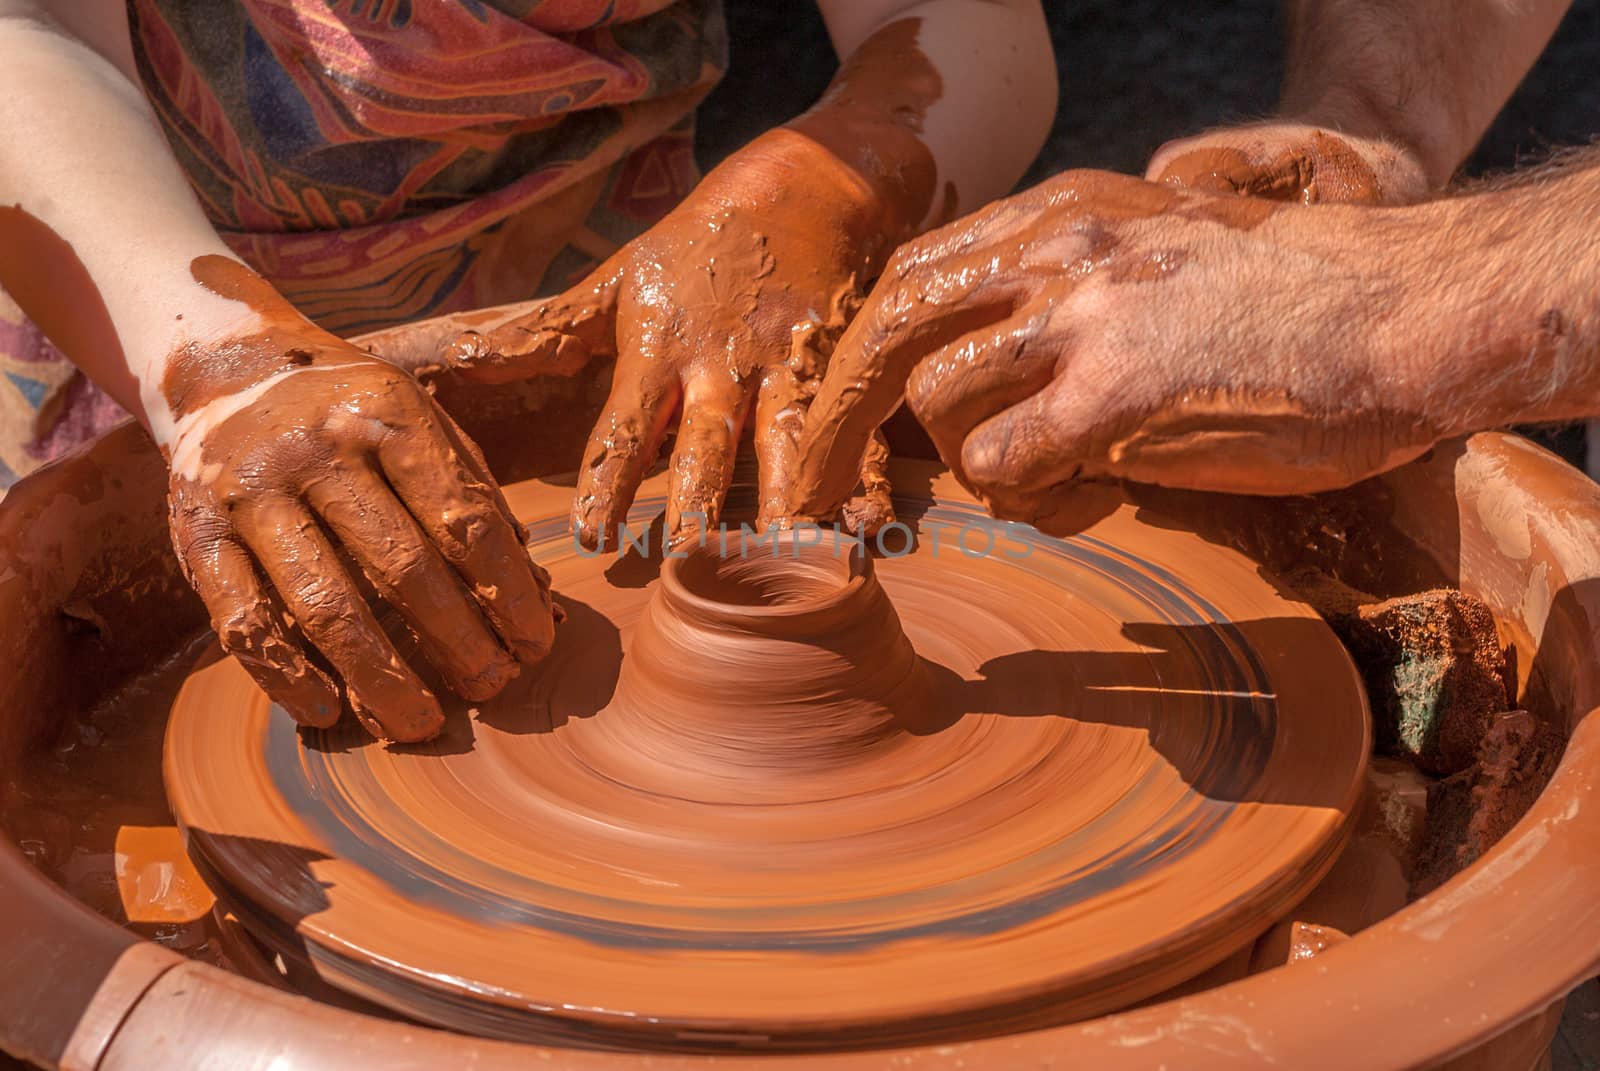 potter teaches to sculpt in clay pot on a turning pottery wheel